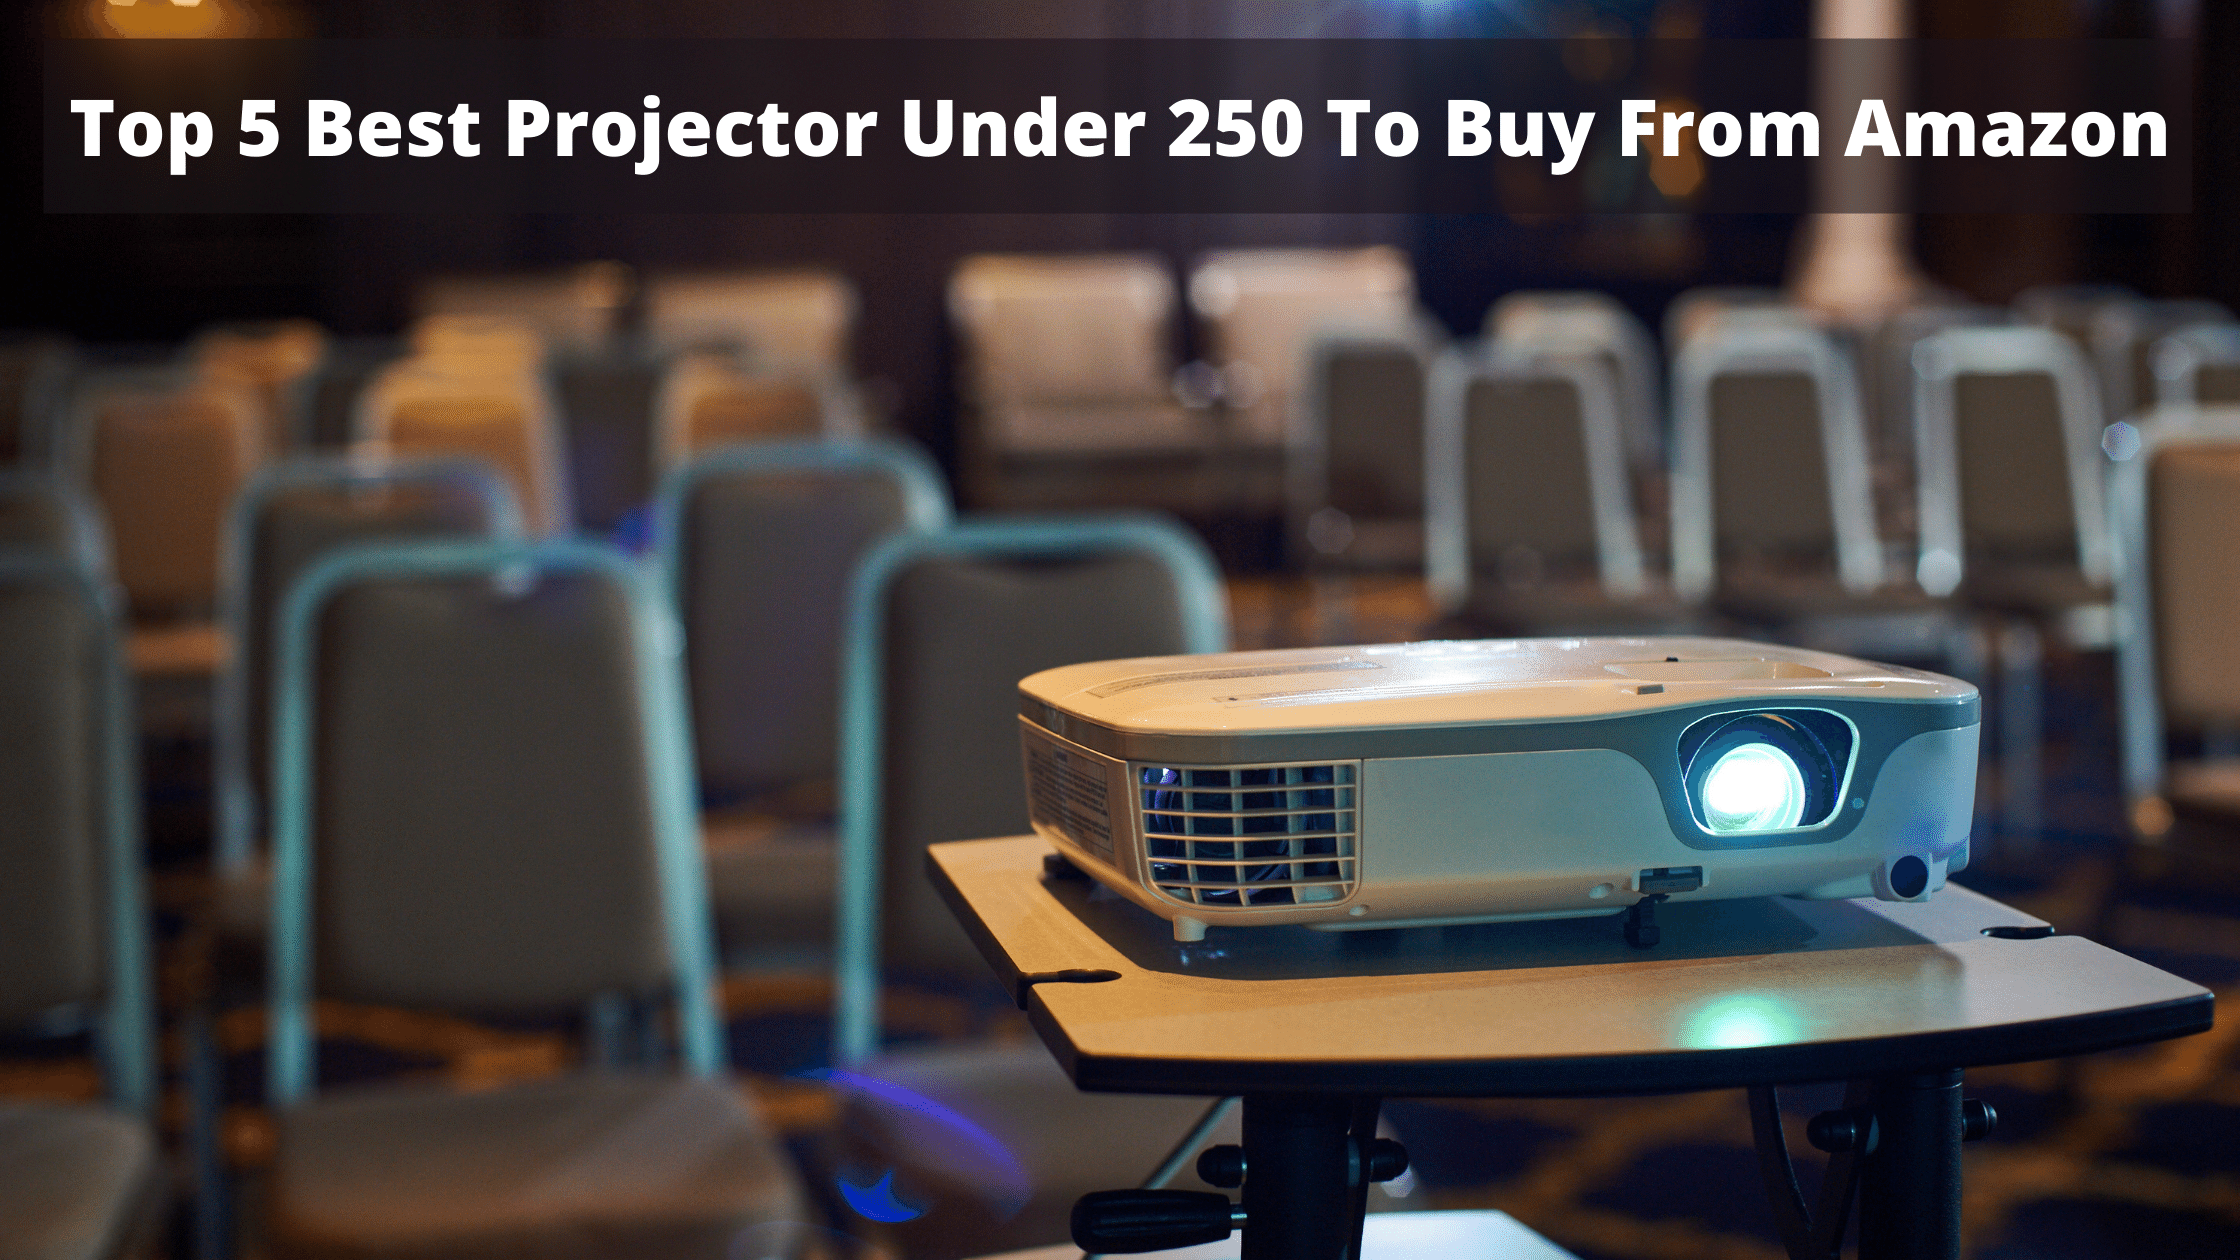 Top 5 Best Projector Under 250 To Buy From Amazon